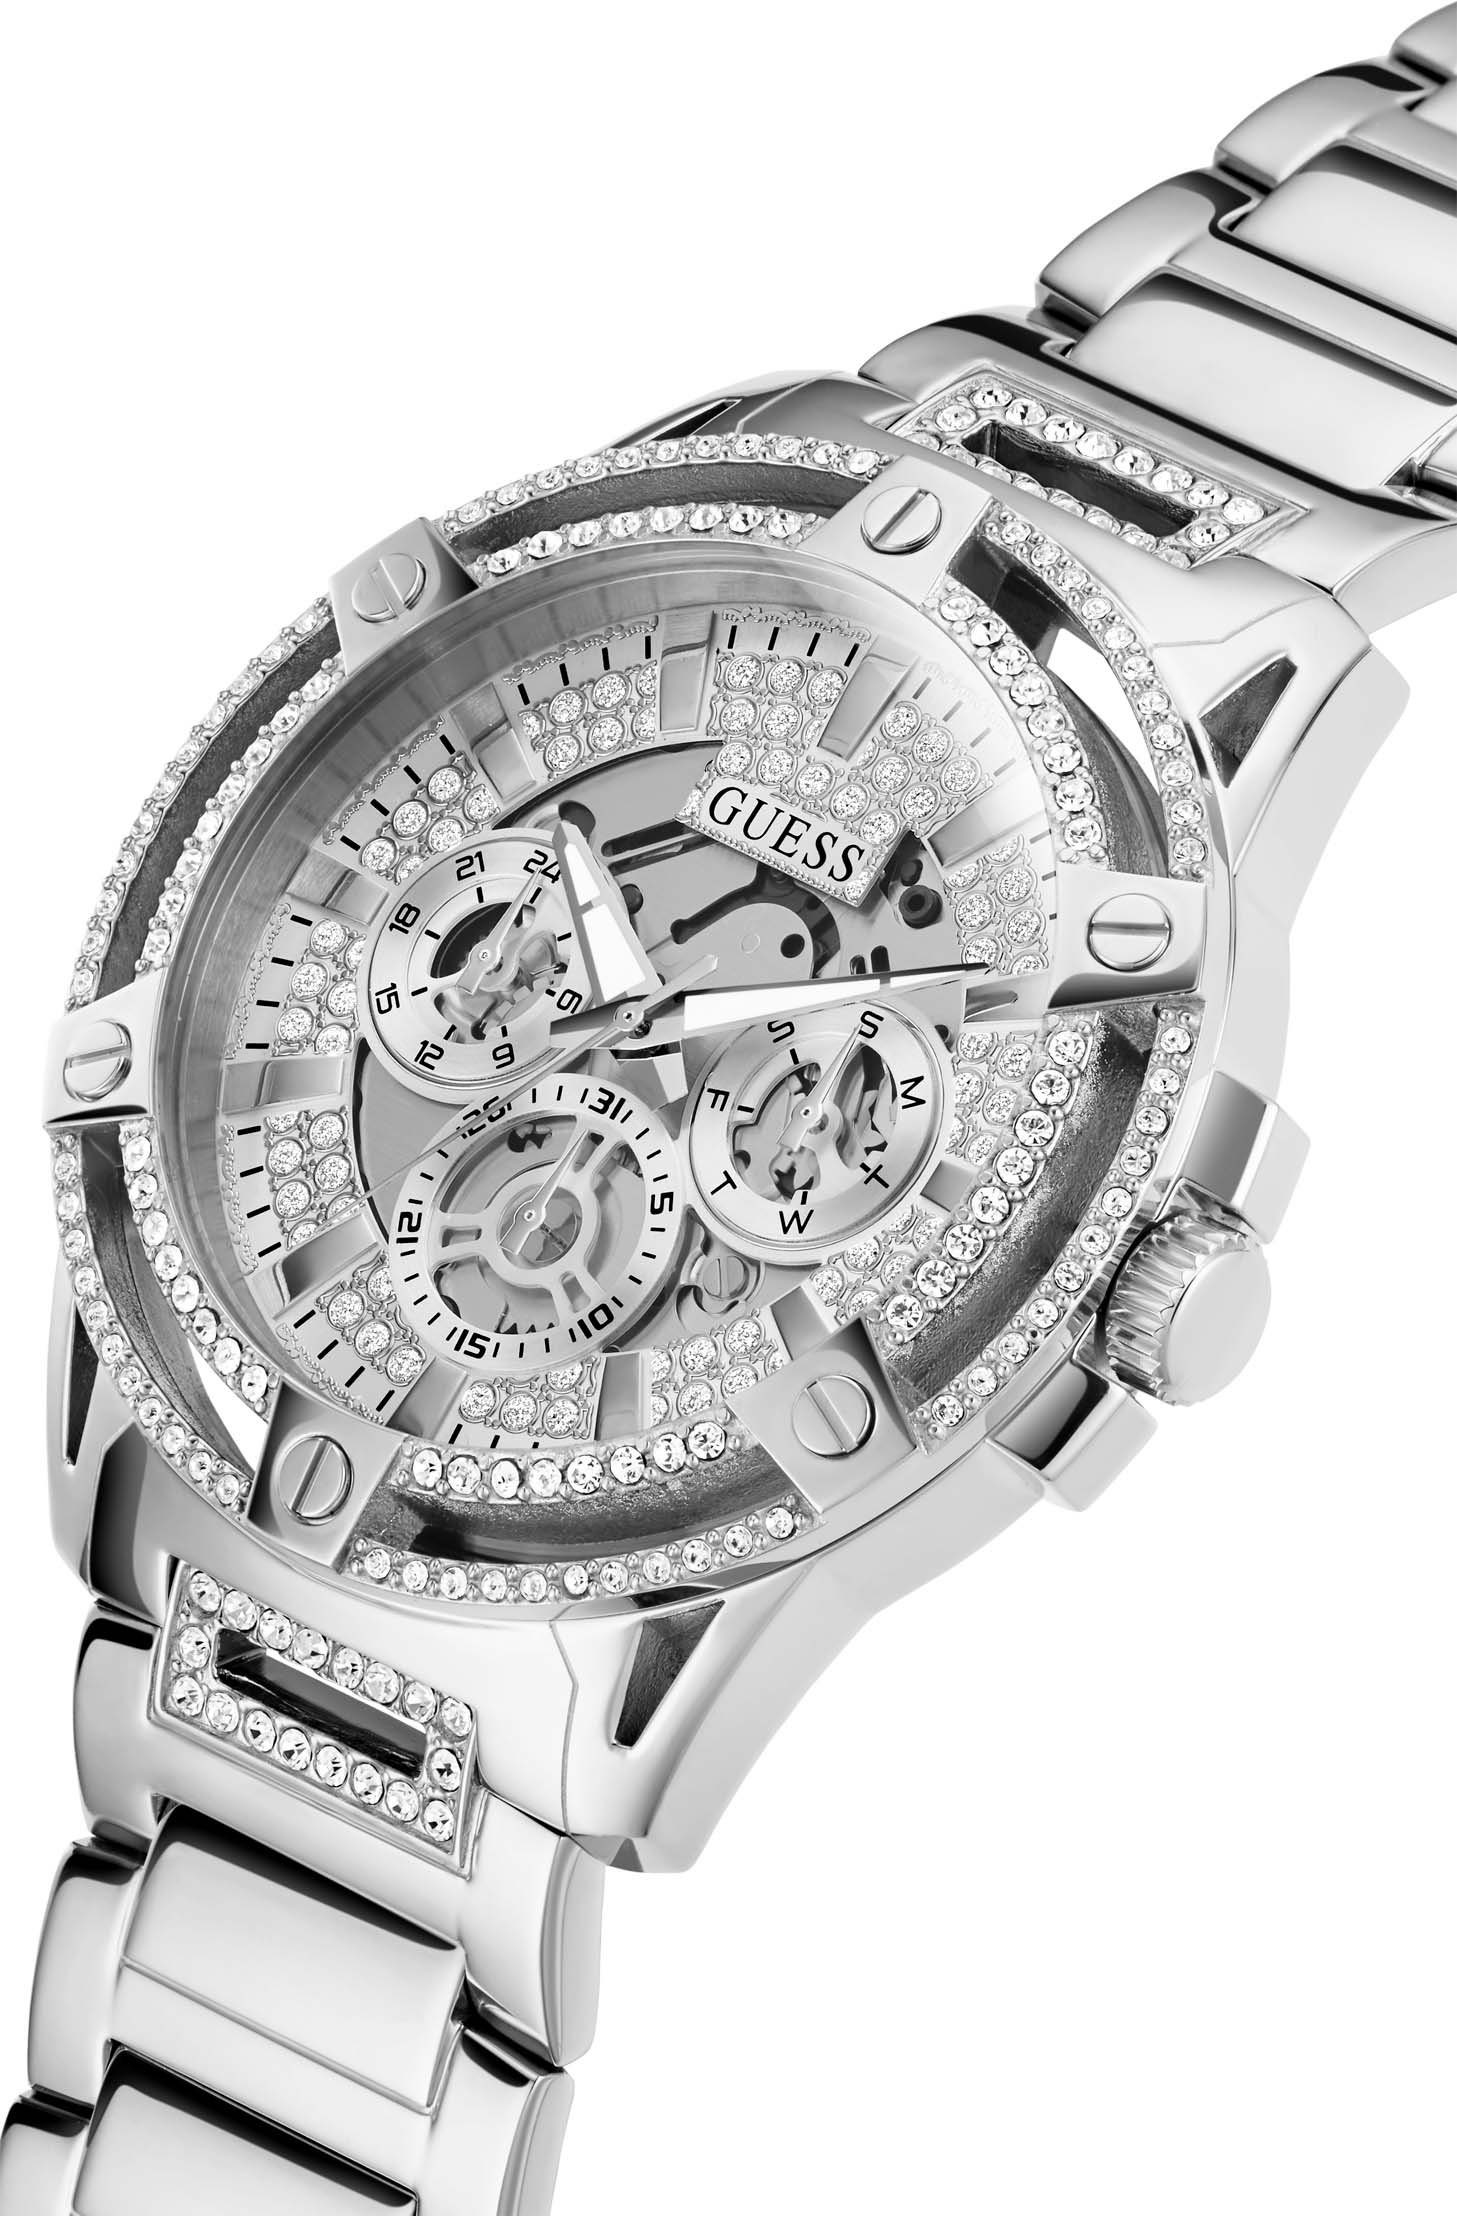 Multifunktionsuhr GW0497G1 Guess